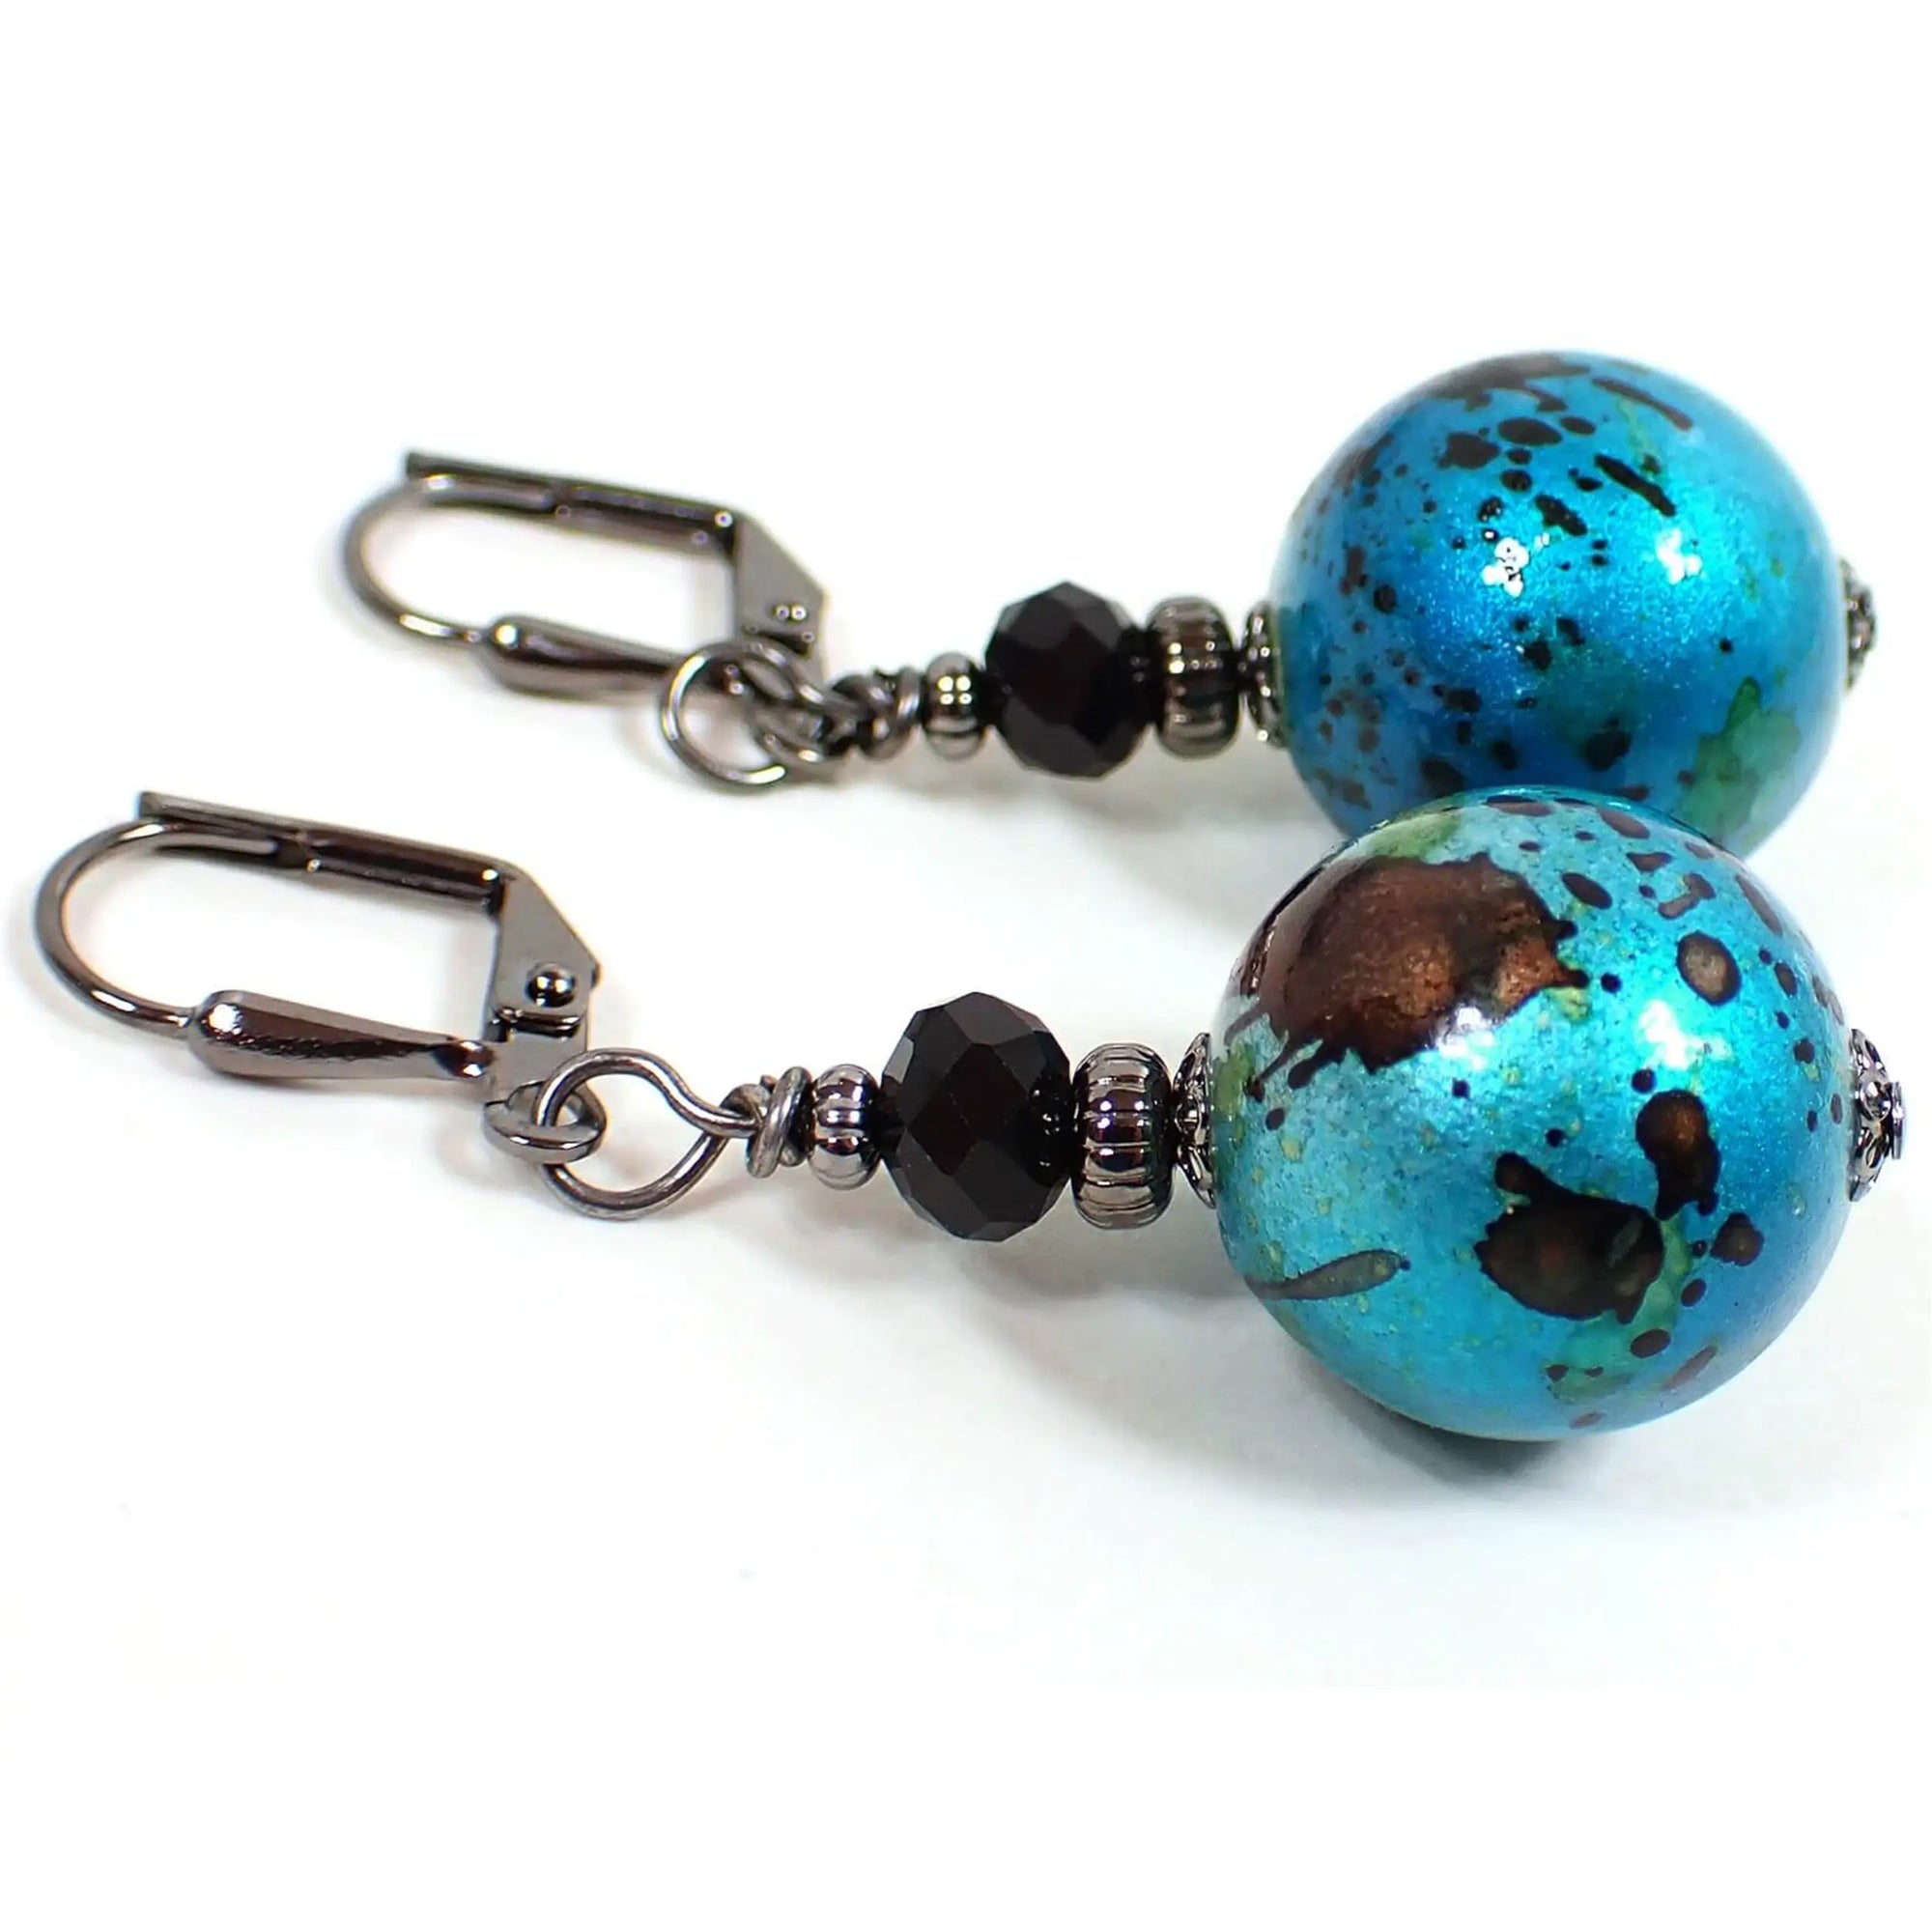 Side view of the handmade drop earrings. The metal is gunmetal gray in color. There are black faceted glass beads at the top. The bottom beads are acrylic and are round ball shaped in a bright metallic teal blue color with black and green splash pattern. Each bottom bead is different from the other in pattern for a unique look.